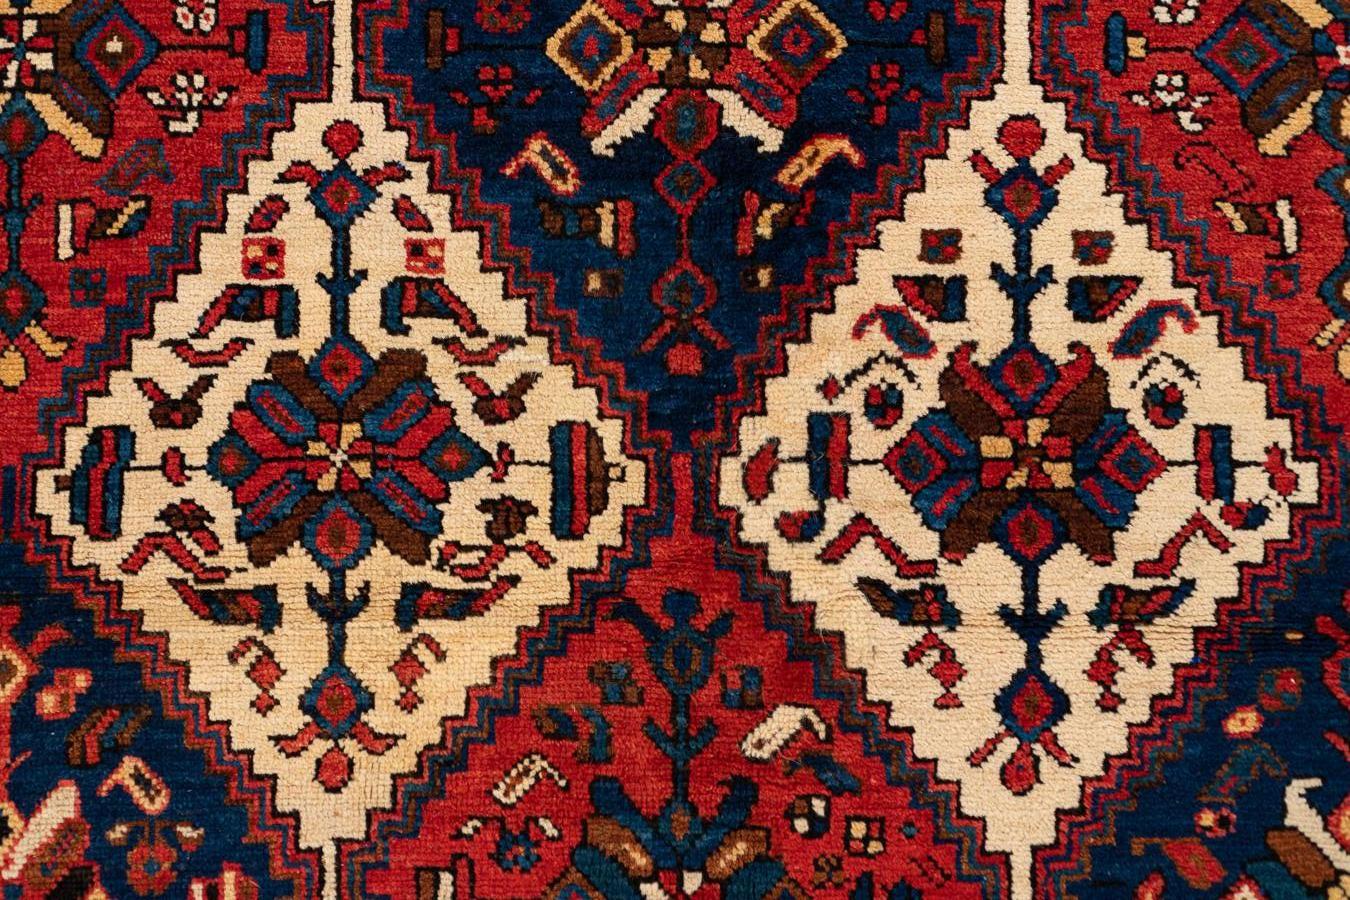 Afshar - Southern Persia

This large Afshar is a rug that transmits exuberant joy. It has an ivory field with rows of medallions in colourful diamonds containing flowers and geometric figures. The central area is protected by six borders with blue